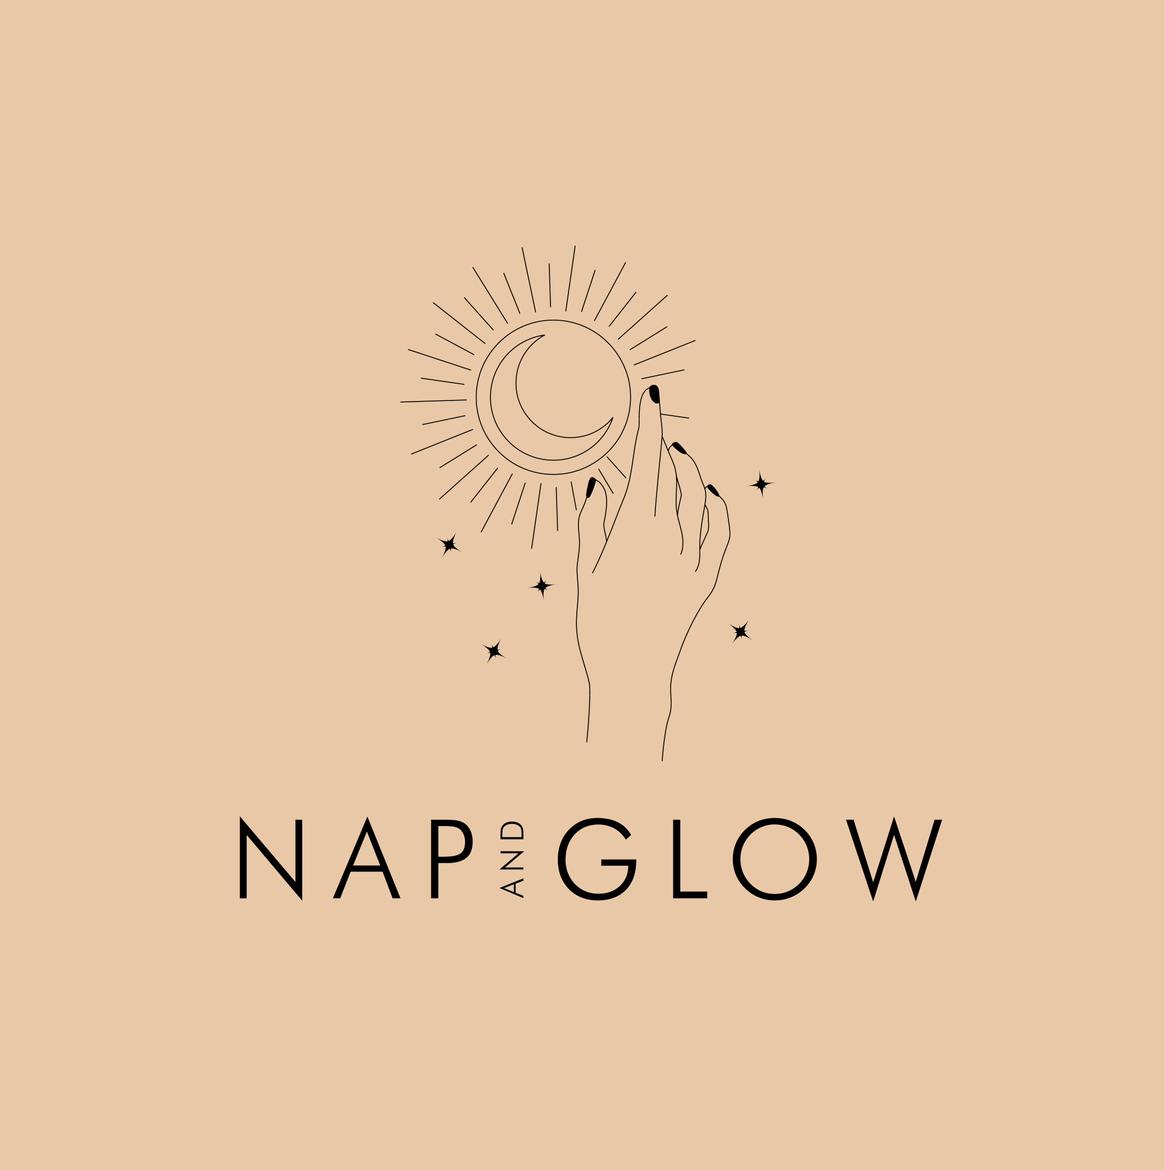 Nap and Glow's images